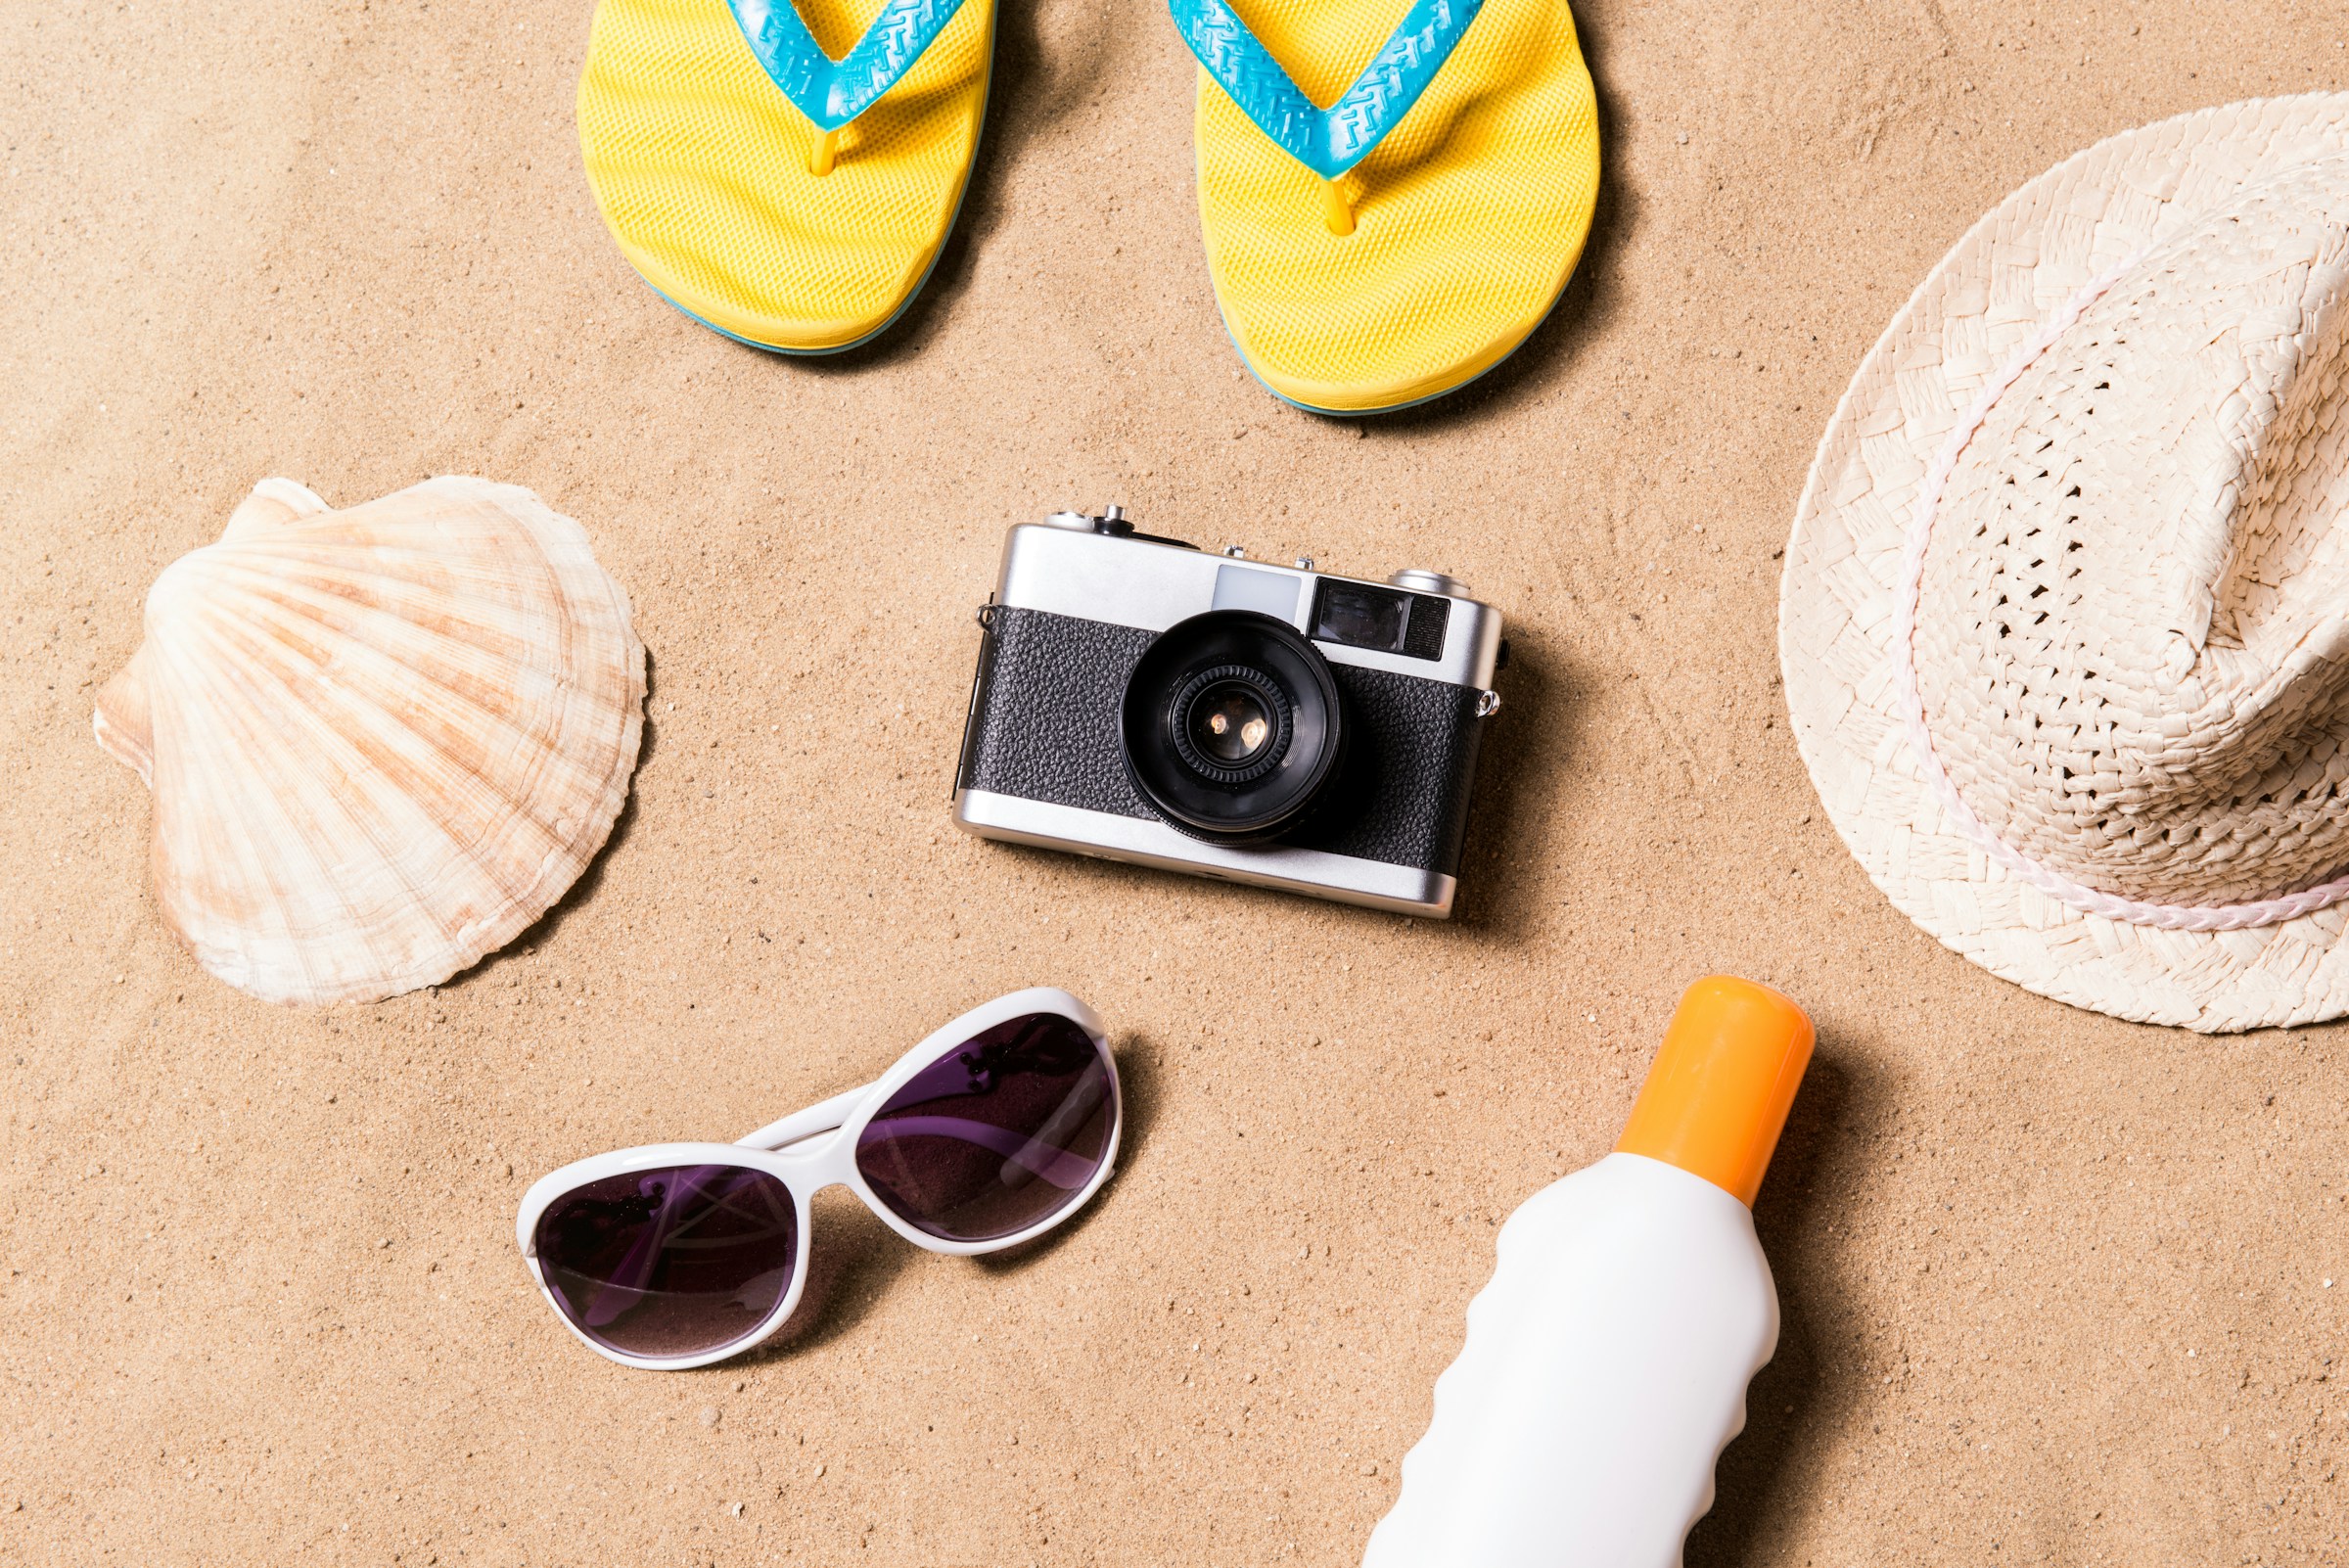 Travel products such as a hat, camera, and sunscreen on a sandy beach